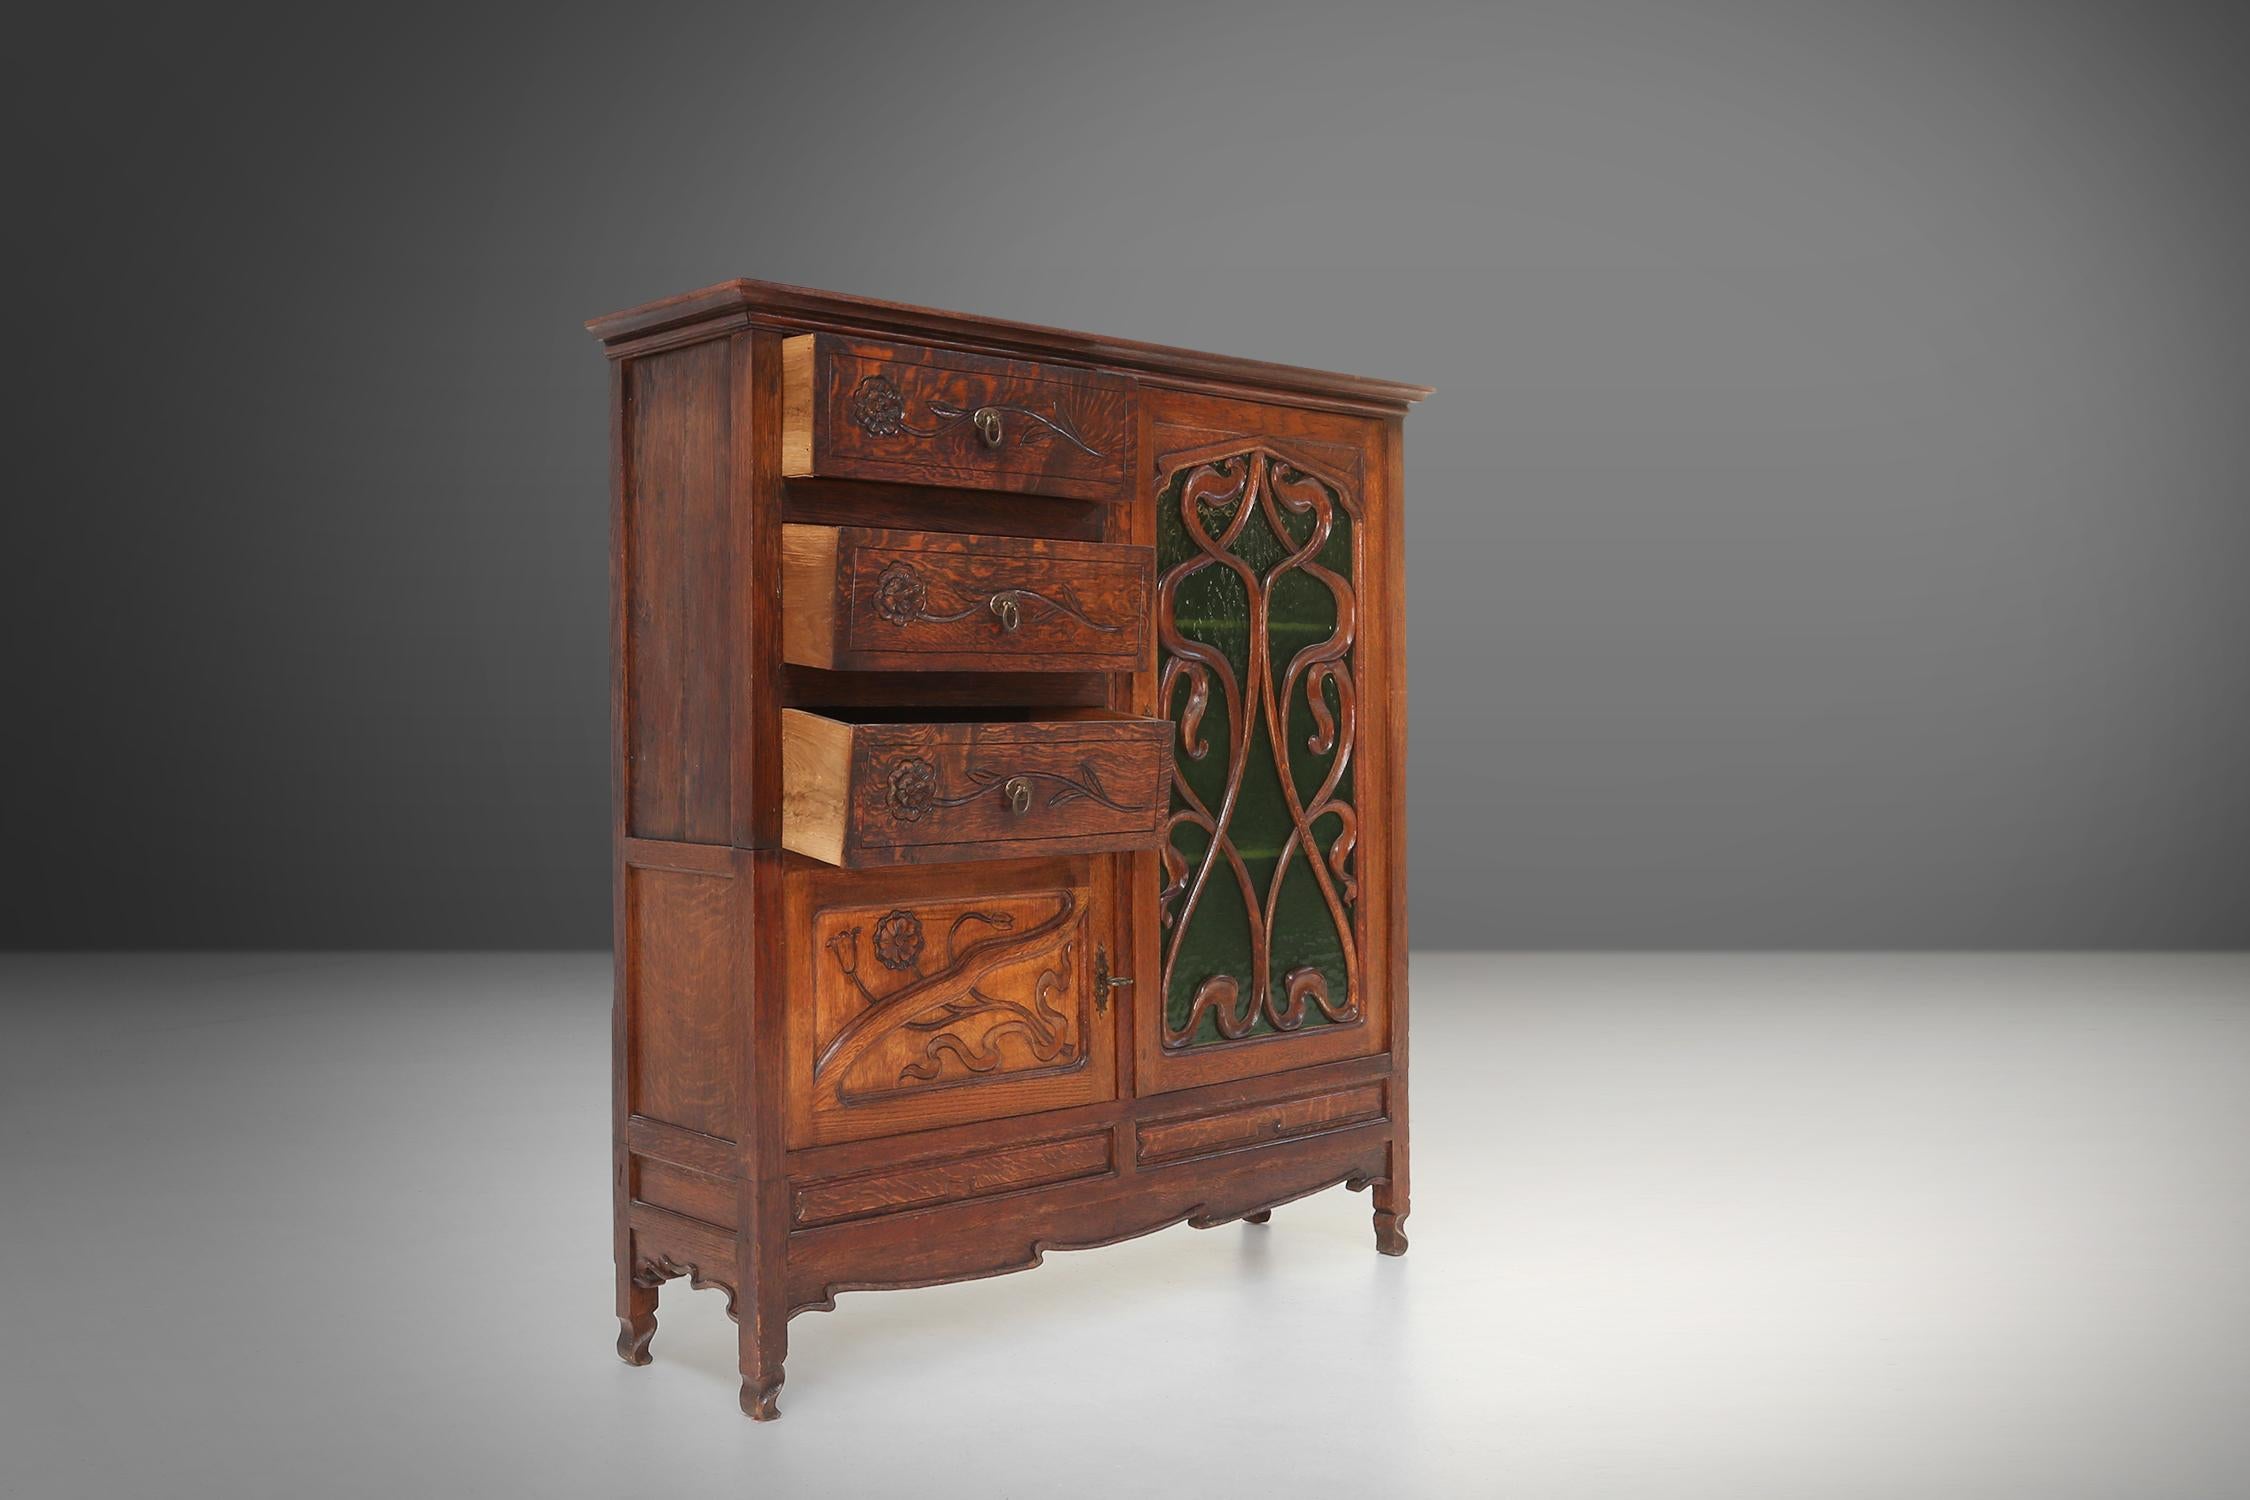 Remarkable Art Nouveau cabinet in oak with green glass door, France, 1910 For Sale 4